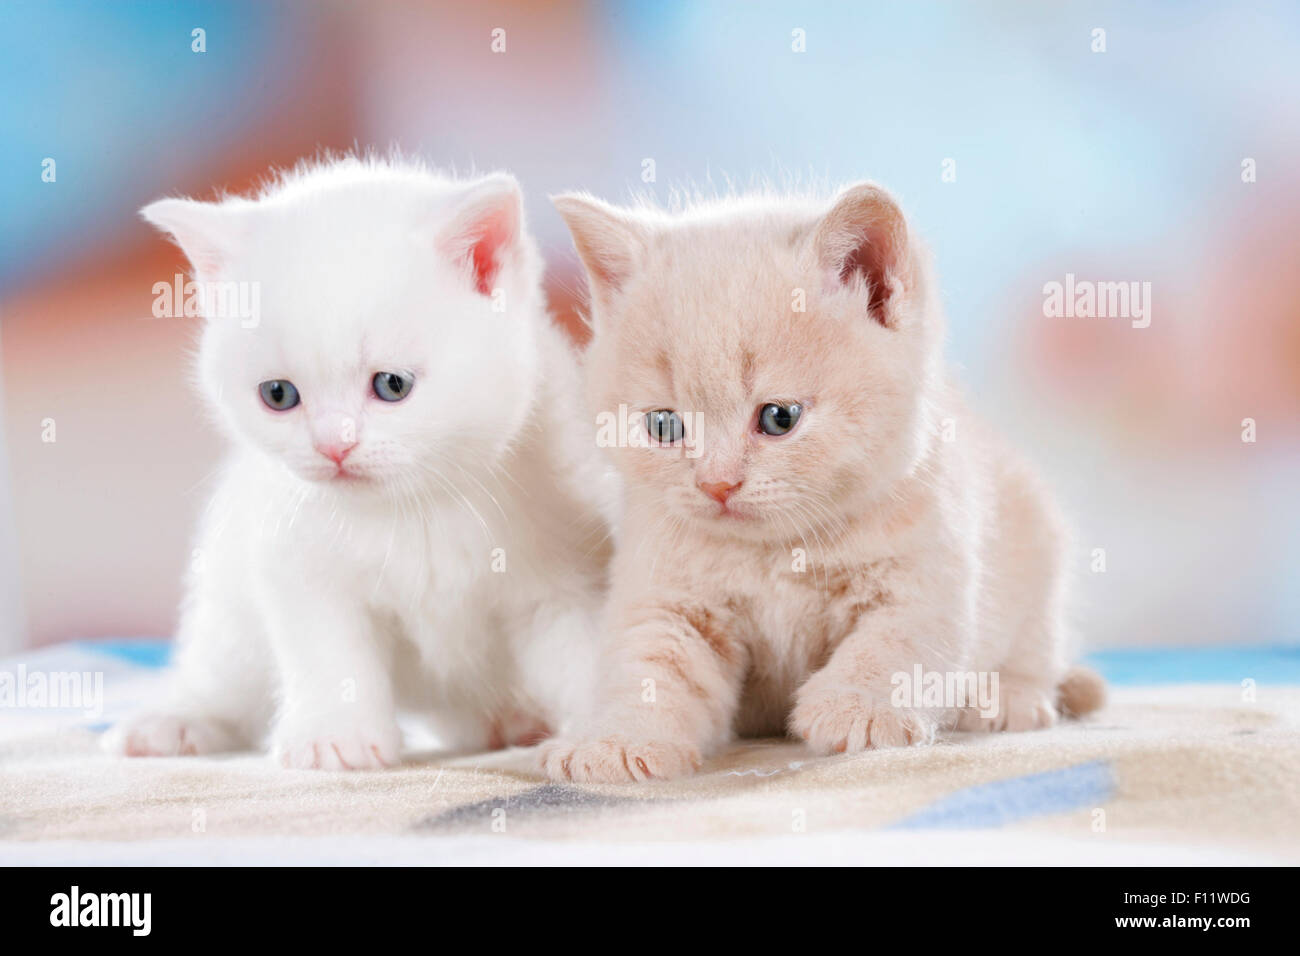 British Shorthair Two kittens (white and cream) sitting on a blanket Stock Photo